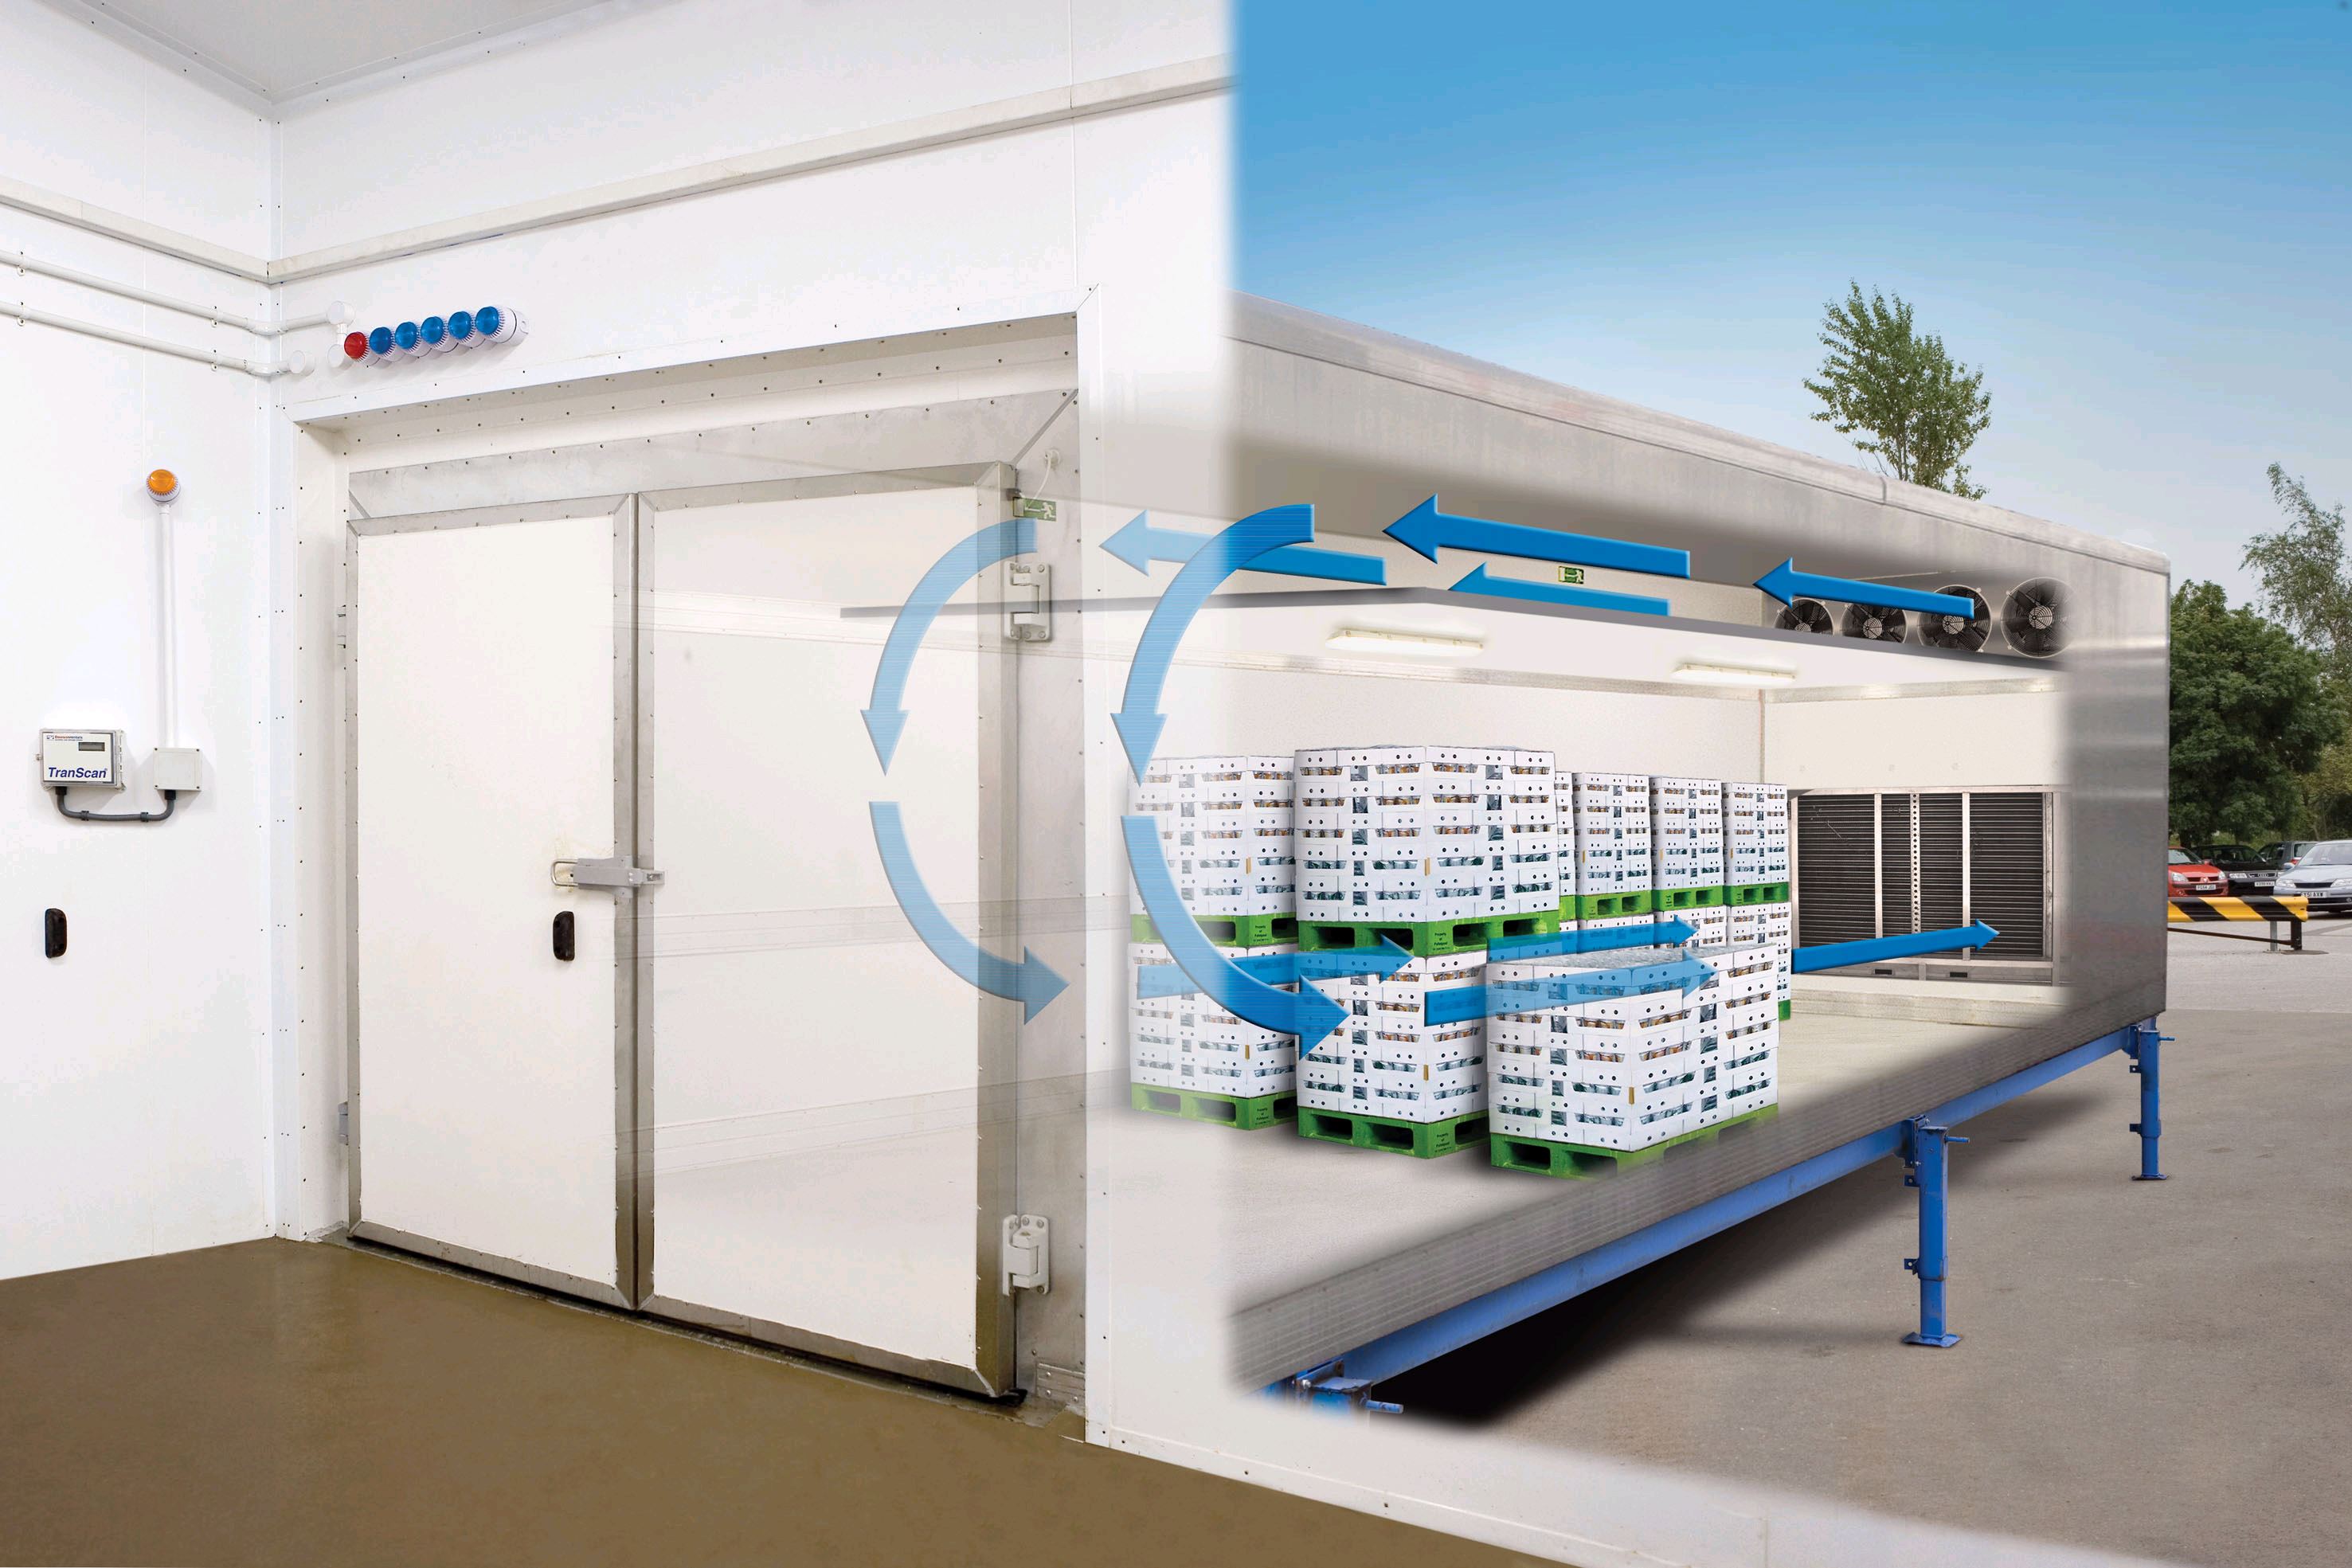 A Dawsongroup tcs blast freezer solution to help you beat the heat.